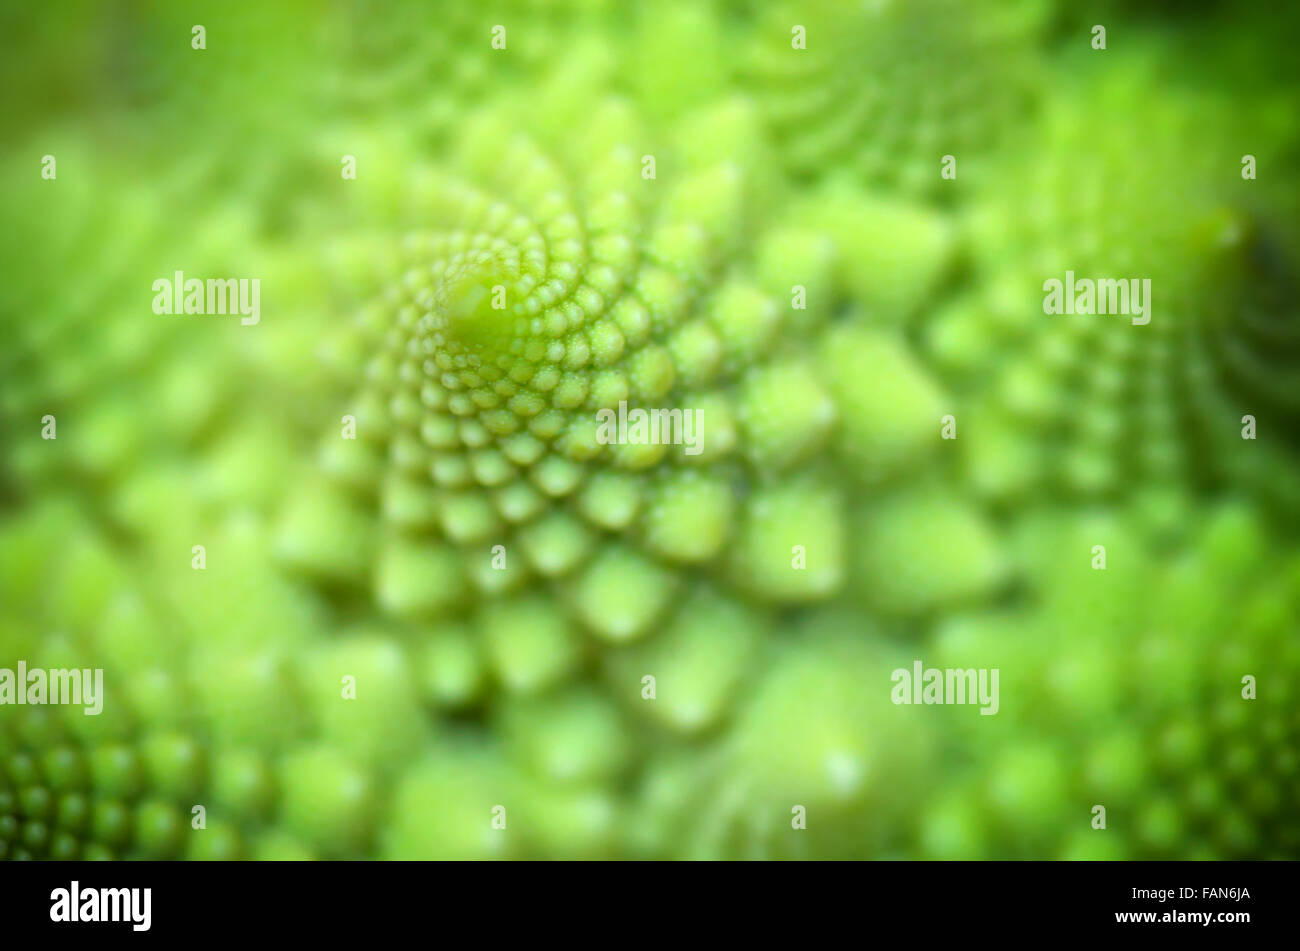 Abstract pattern of spiral. Nature macro composition. Shallow depth-of-field. Stock Photo